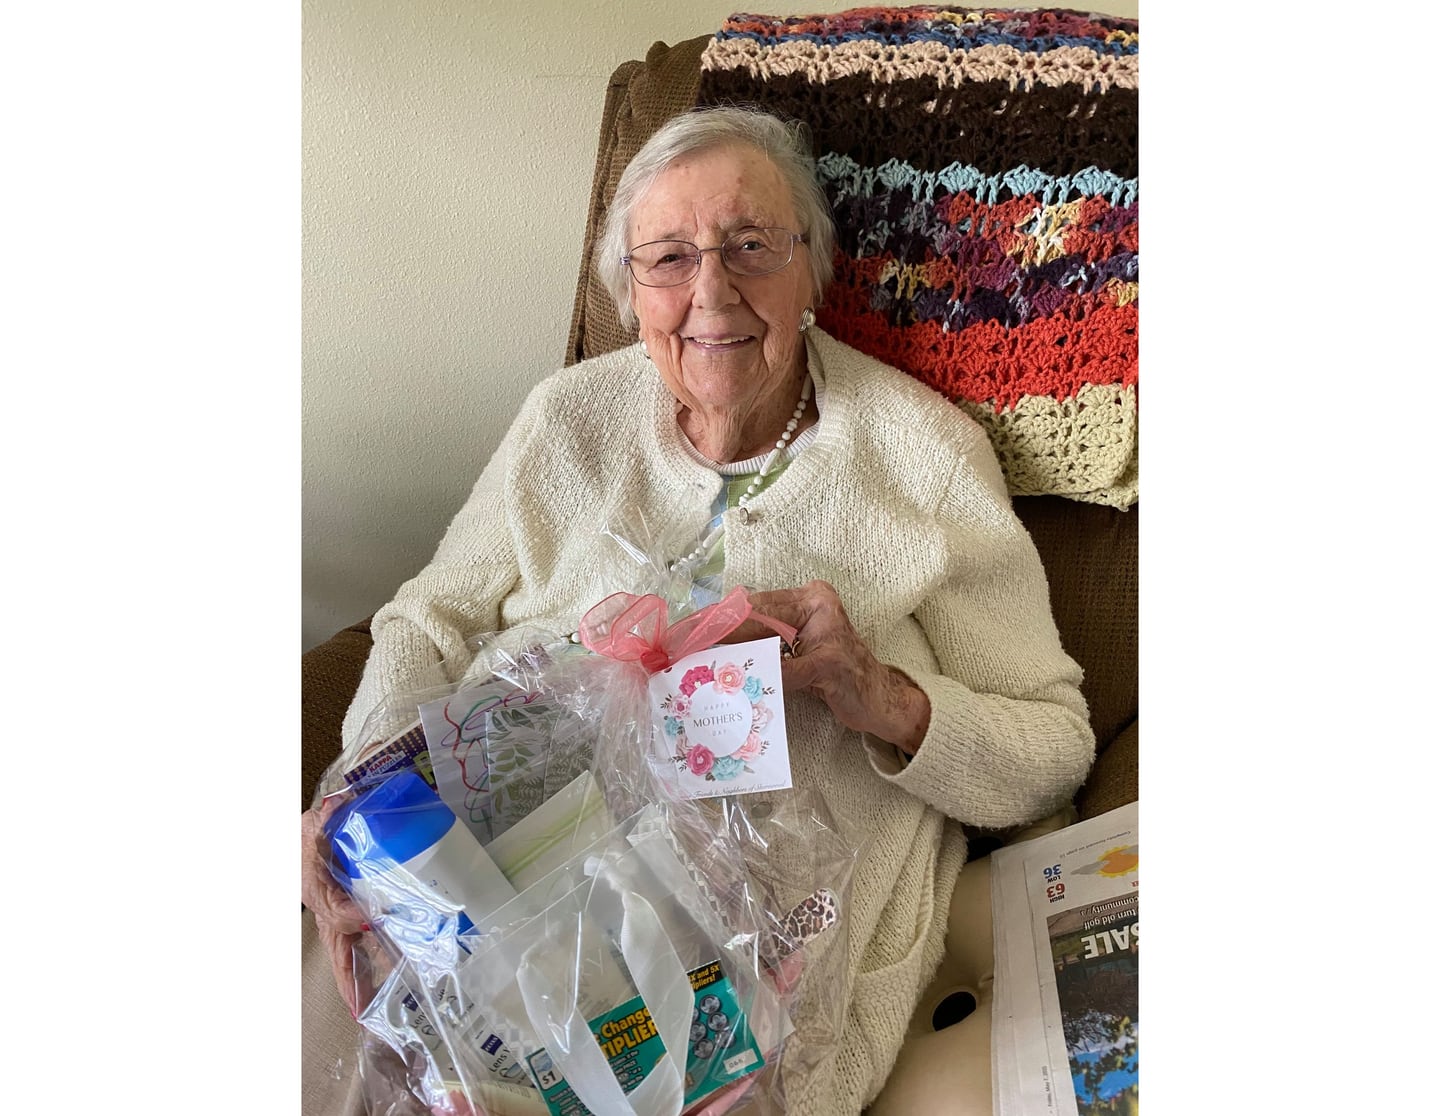 Helen Minnick was one of 90 women at The Timbers of Shorewood who received a gift basket on Mother's Day from Tami Wadas of Shorewood.